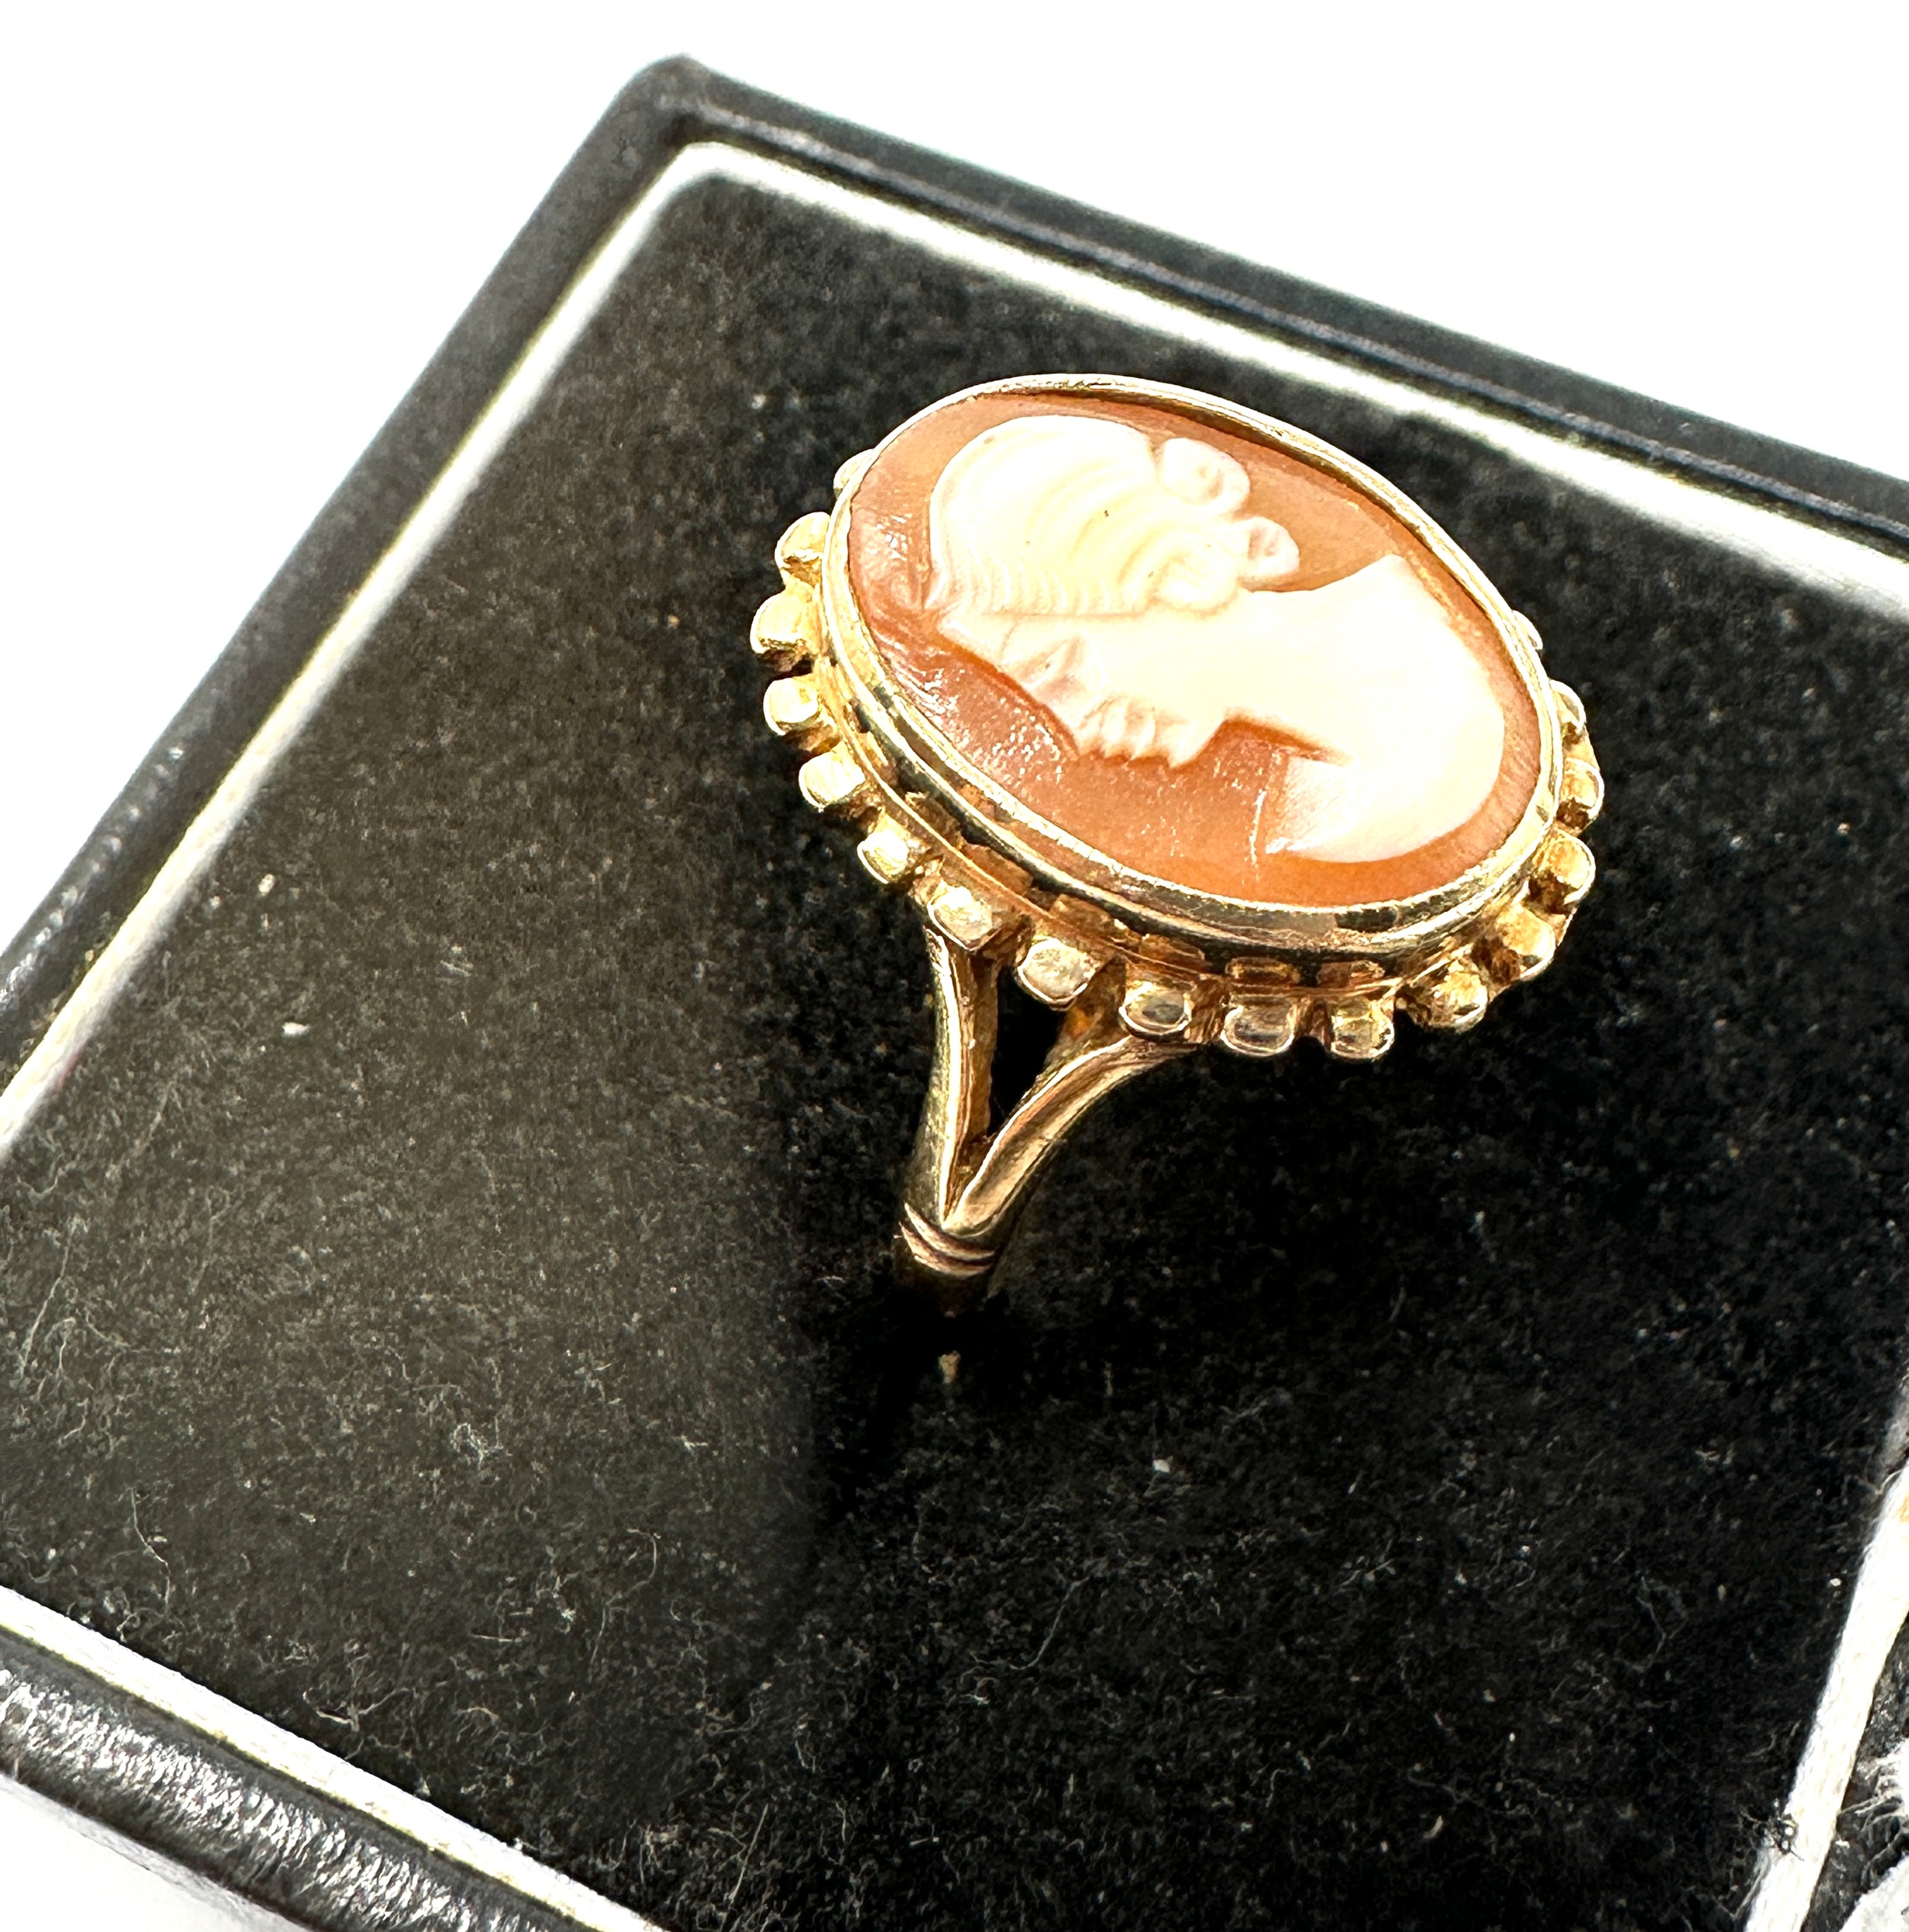 Vintage 9ct gold cameo set ring weight 3.1g - Image 2 of 3